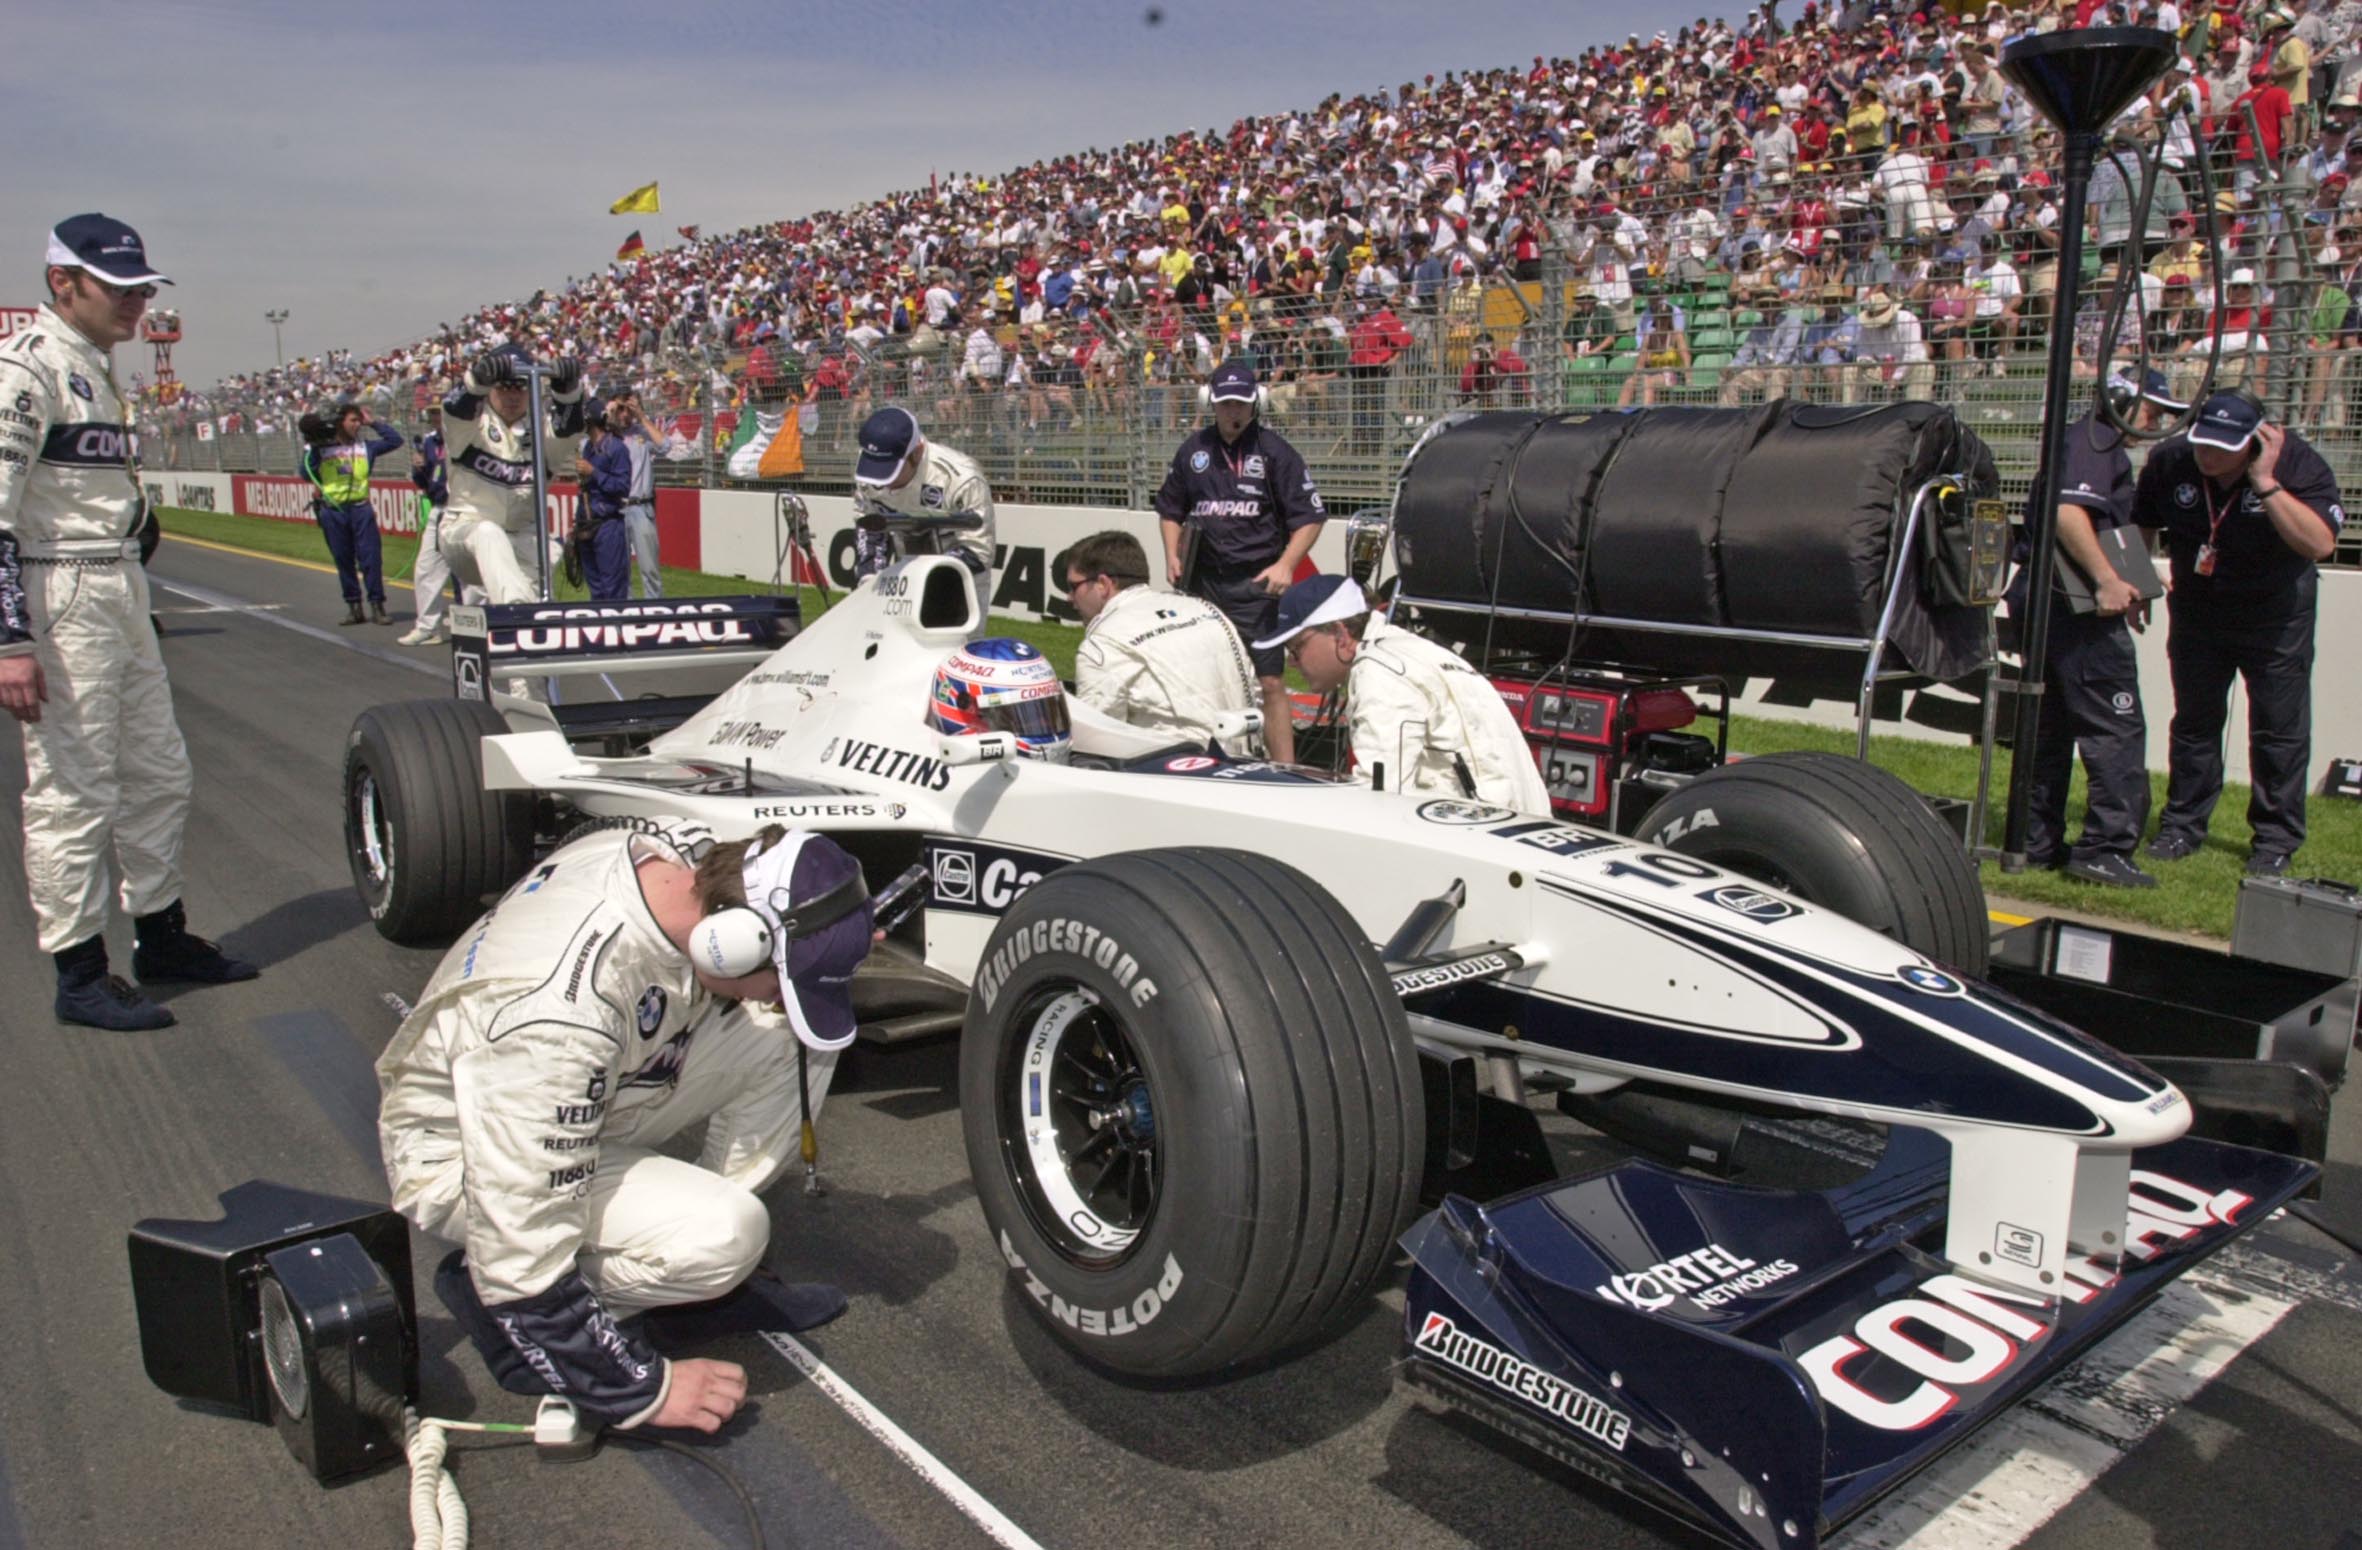 Jenson Button on the start line in Melbourne in 2000 with the brand new V10 BMW engine Williams. (Photo BMW)